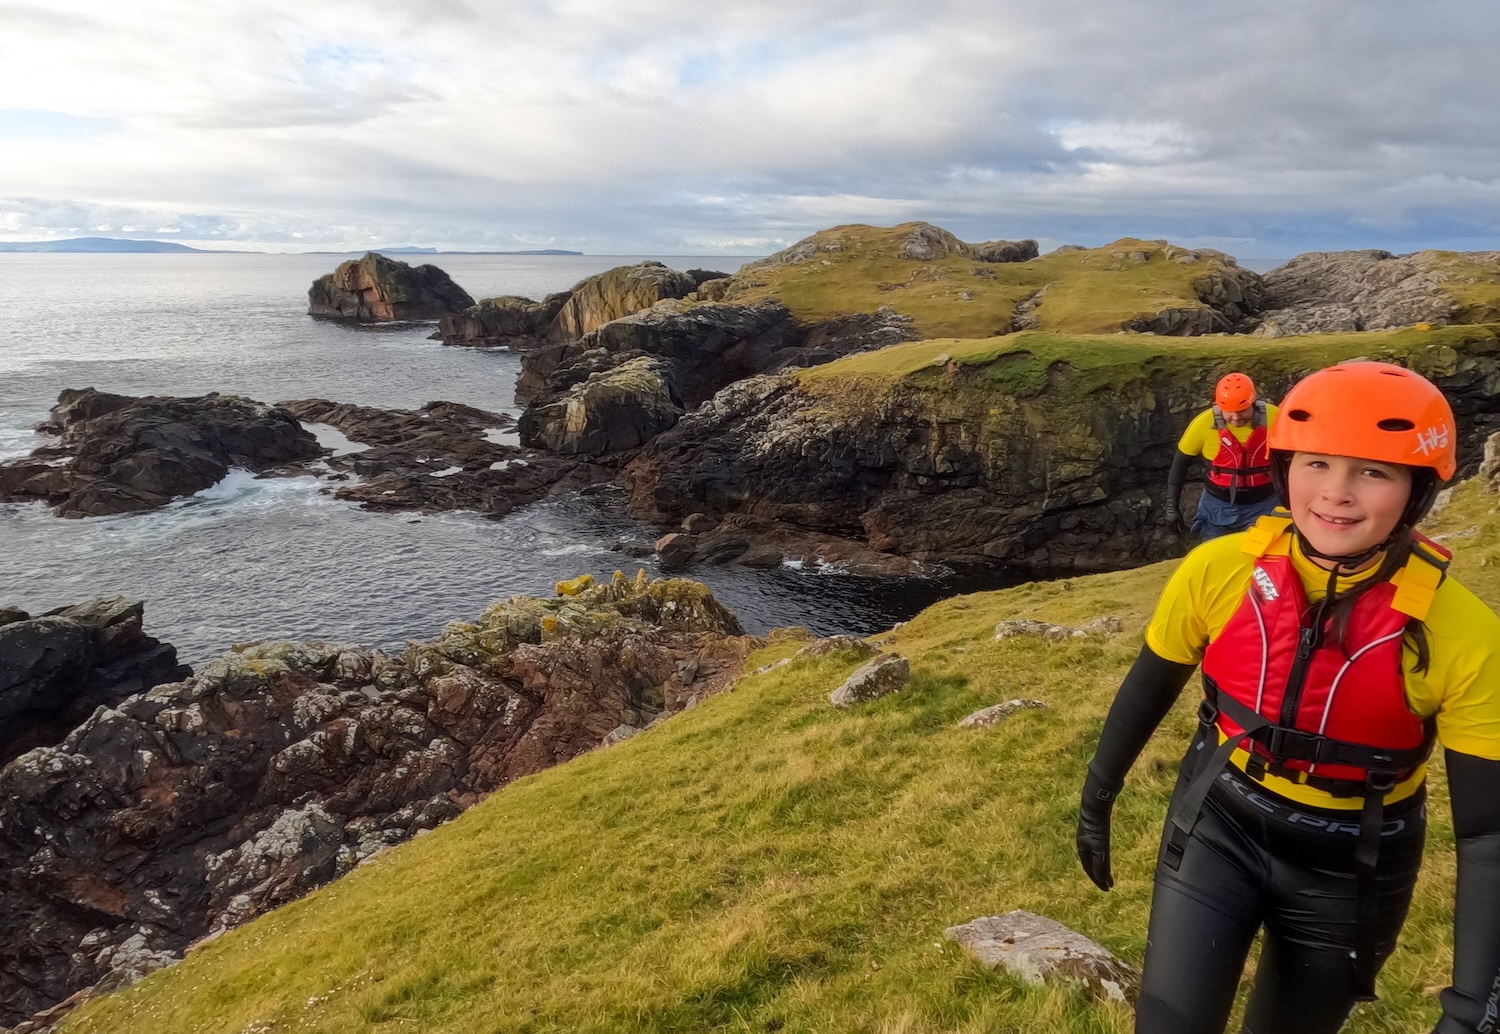 Scottish coasteering business sees growth with Business Gateway support